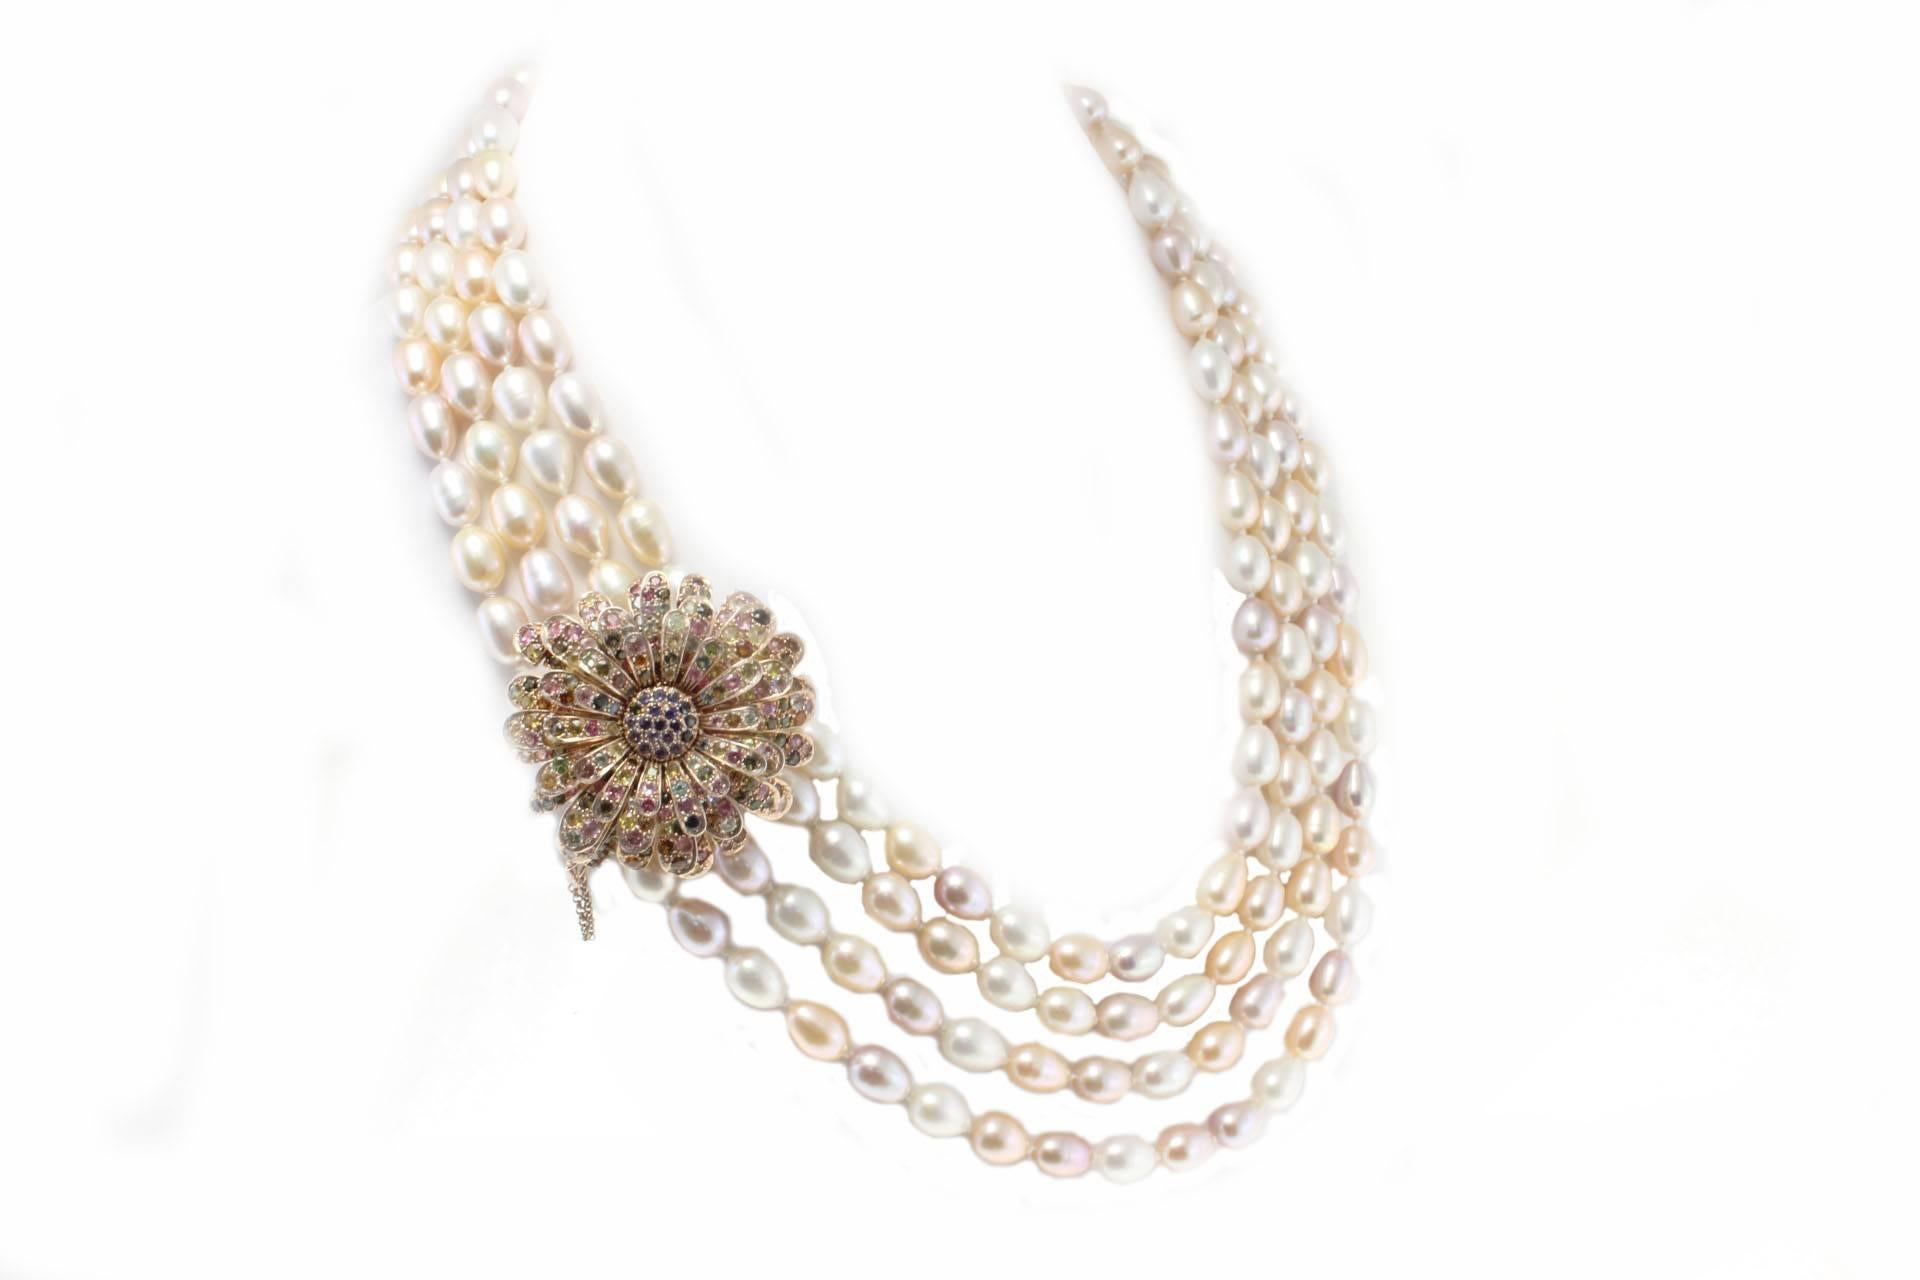 Fascinating 4 strands beaded necklace with a clasp composed of tourmalines and iolite encrusted on a base in 9 K rose gold and silver
Tot weight 262.9 g
Tourmaline and iolite21.28 ct
Pearls 216.50 g
Rf. ucce


For any inquiries,please contact the